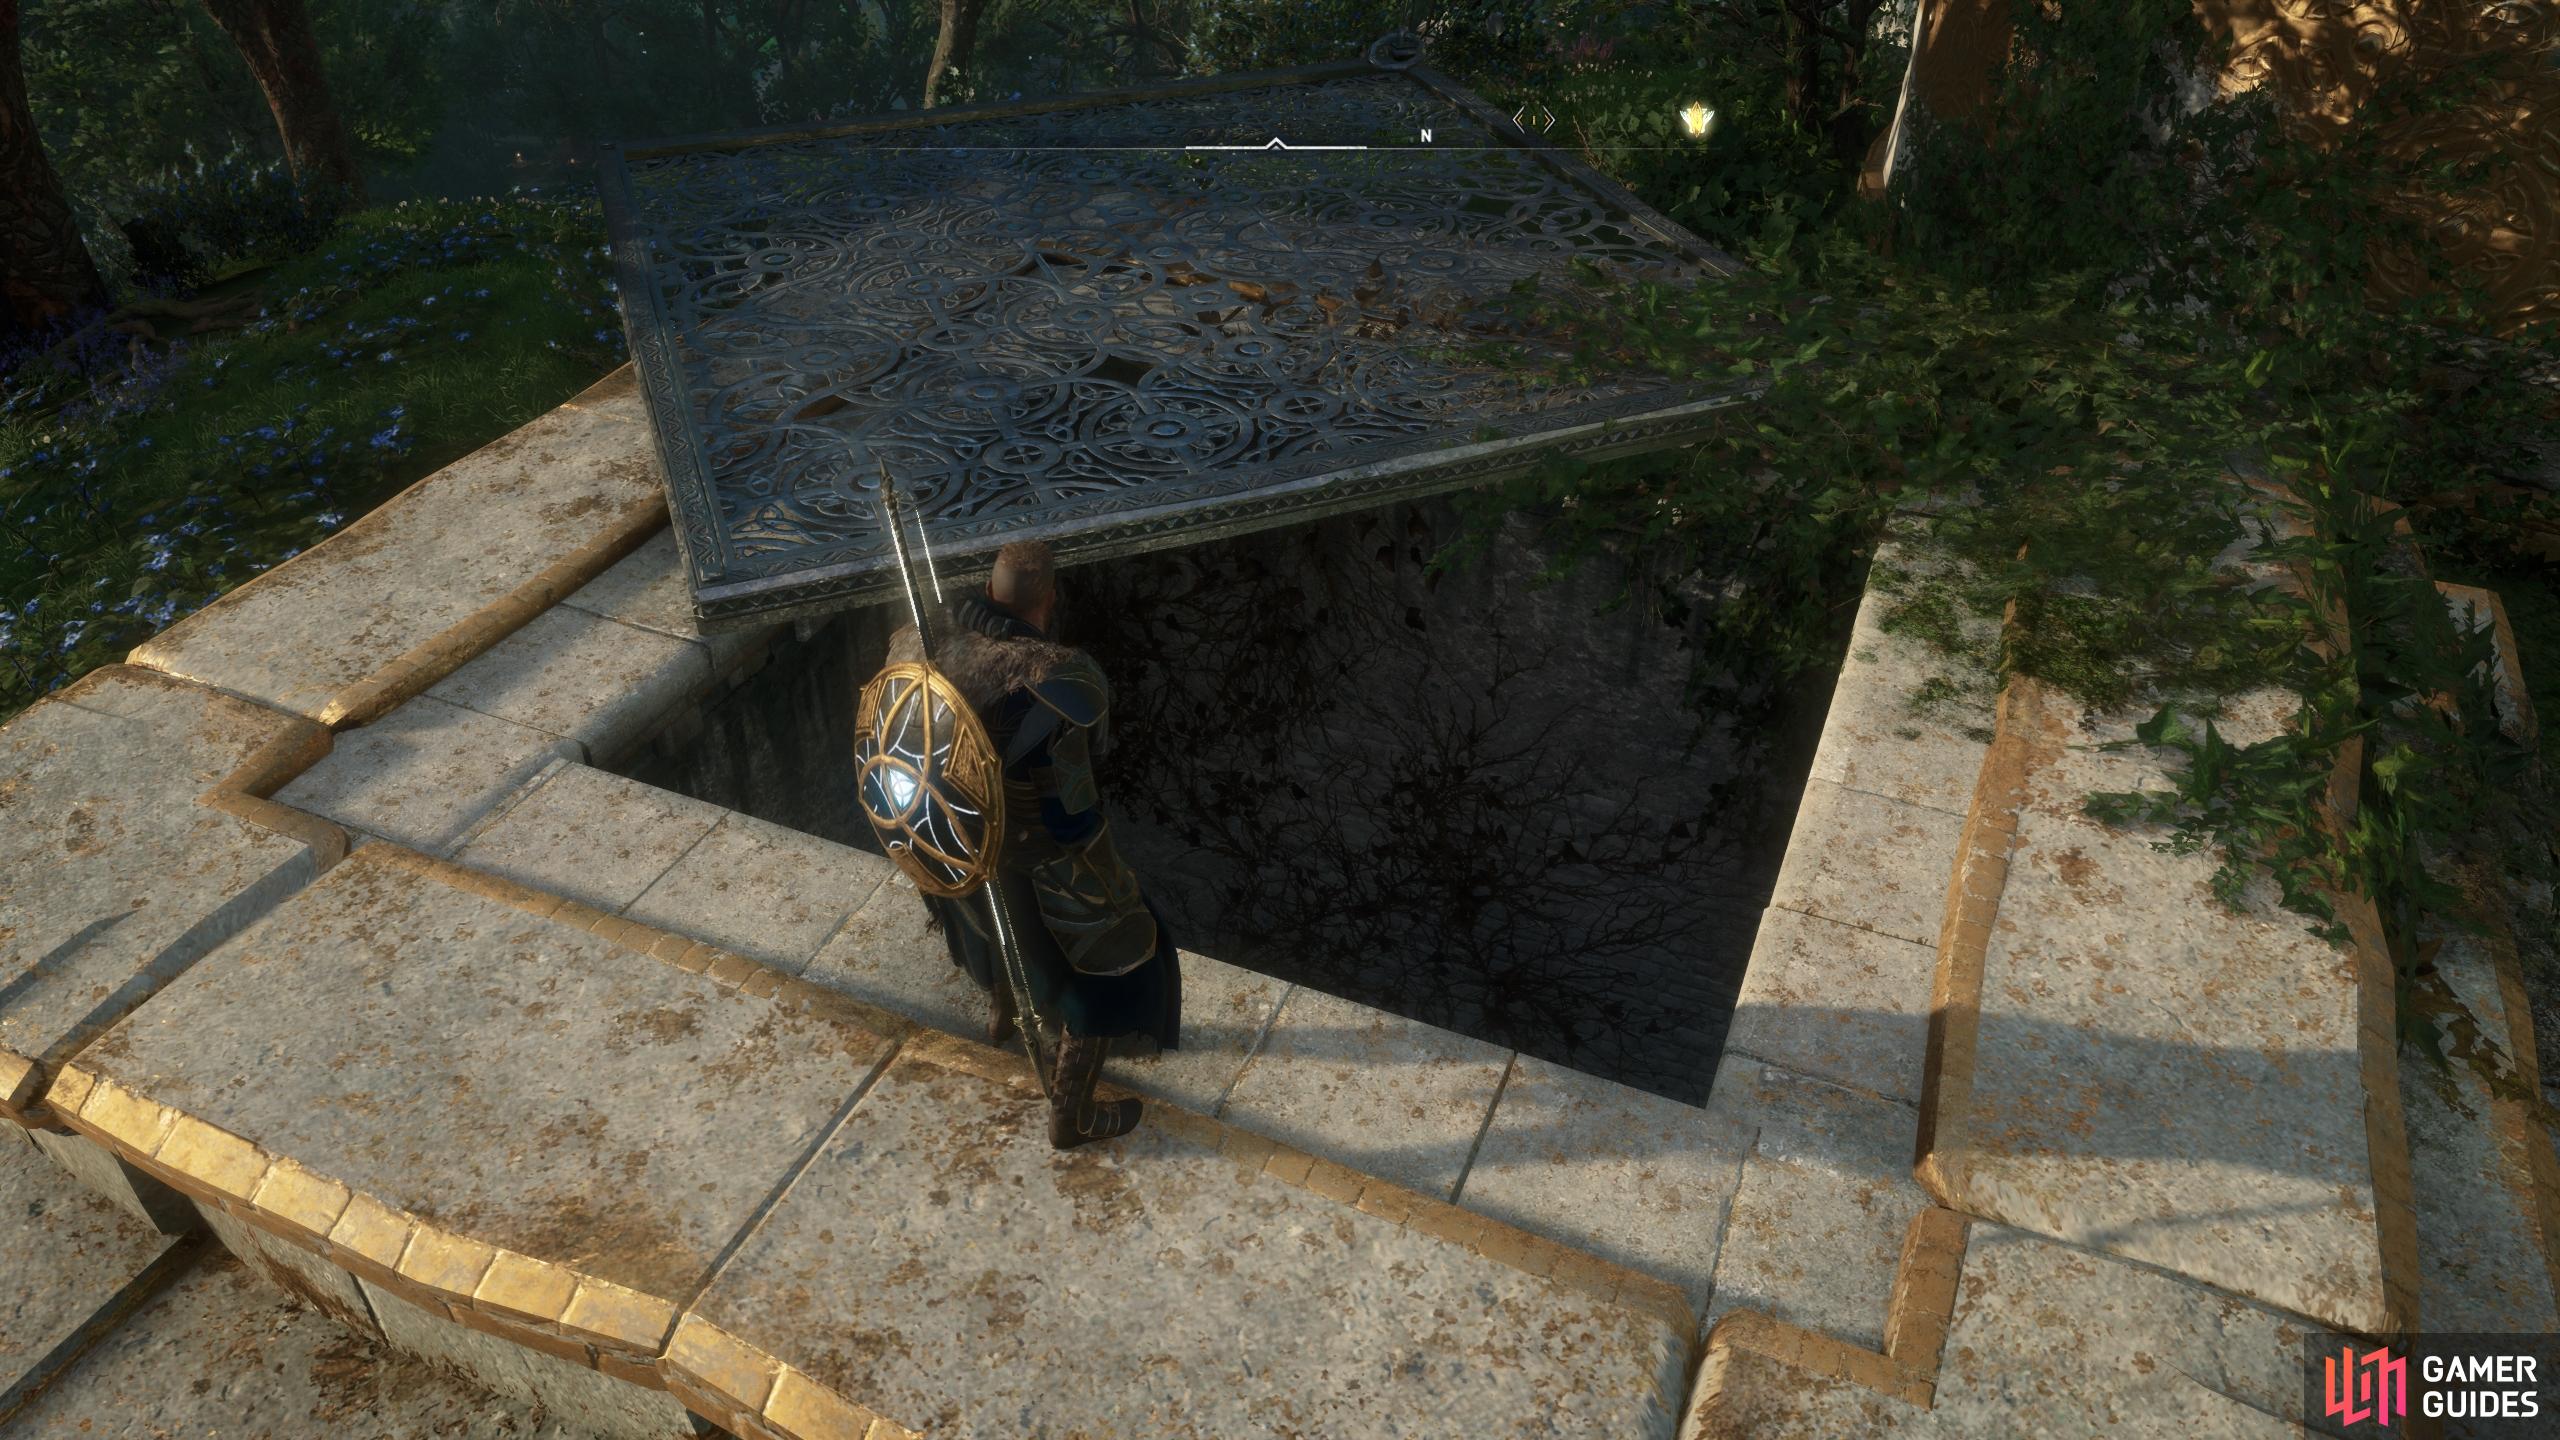 Enter Ivaldi's Forge from the top entrance and climb down to the wooden platforms.